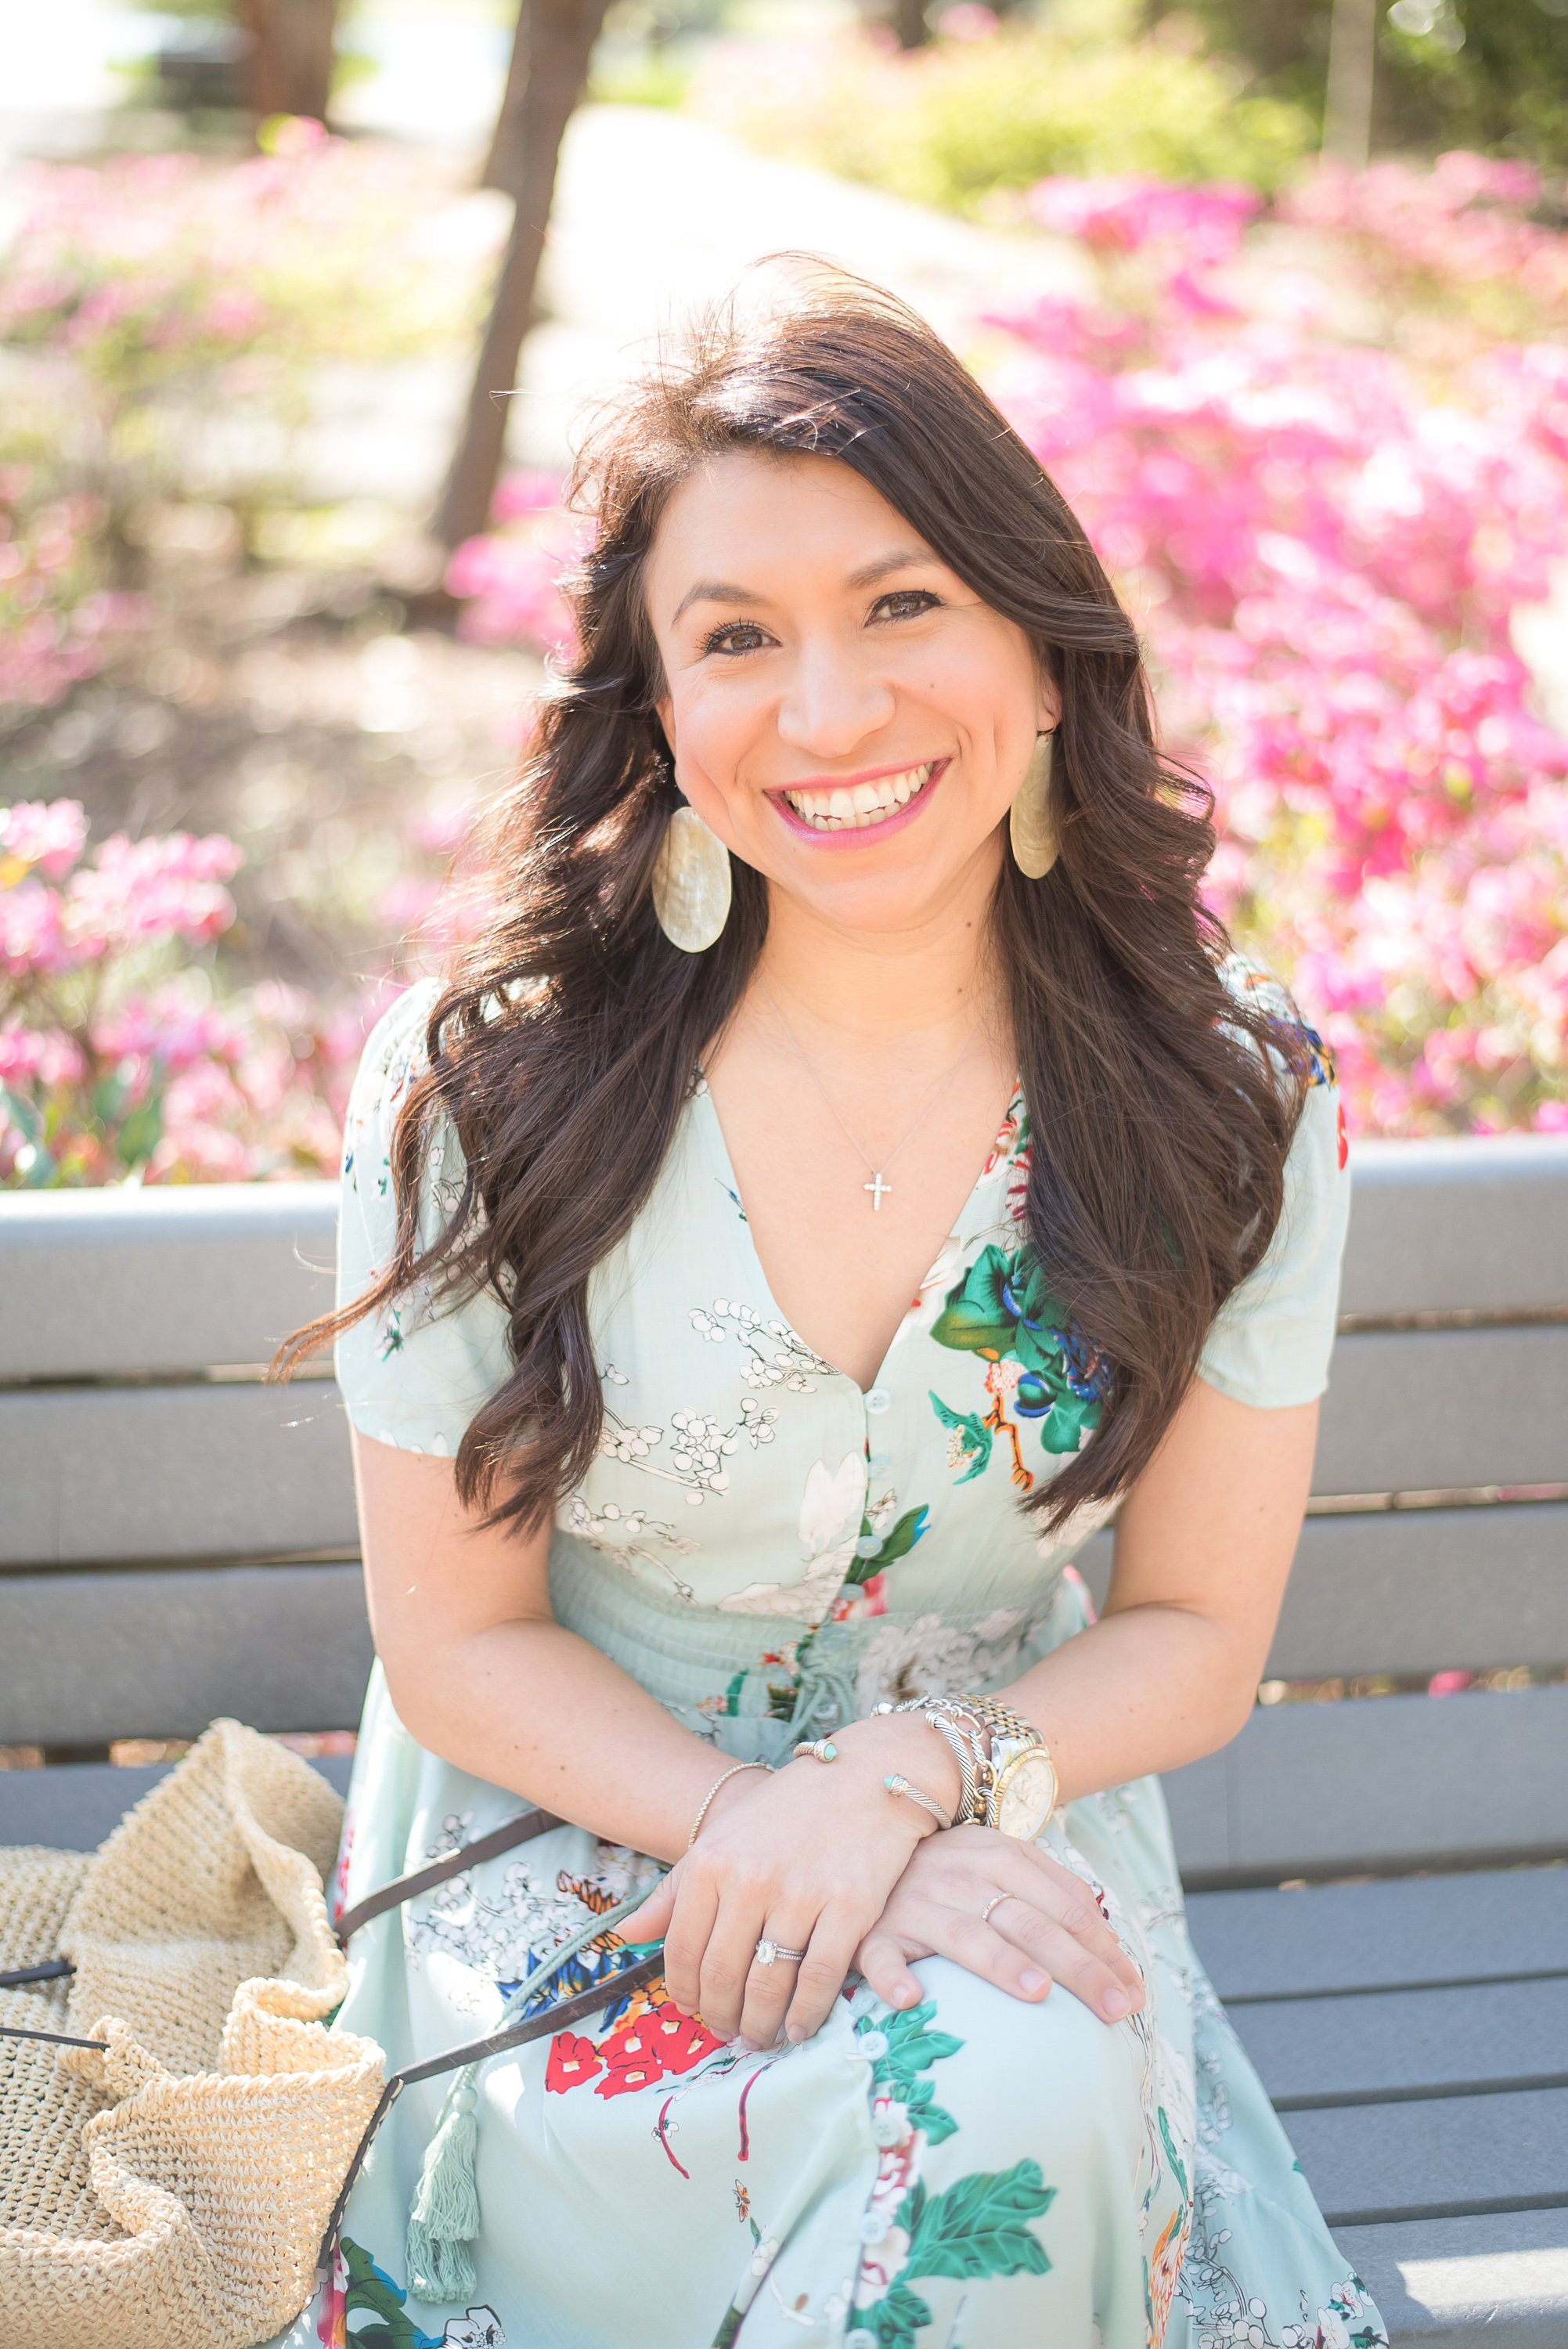 The best spring and summer dress under 30 dollars! #momstyle #fashioninspo #dress #springdresses #fashionchallenge #style challenge Photo by Tiffany Harston Photography - Atascocita family photographer, Eagle Springs photographer